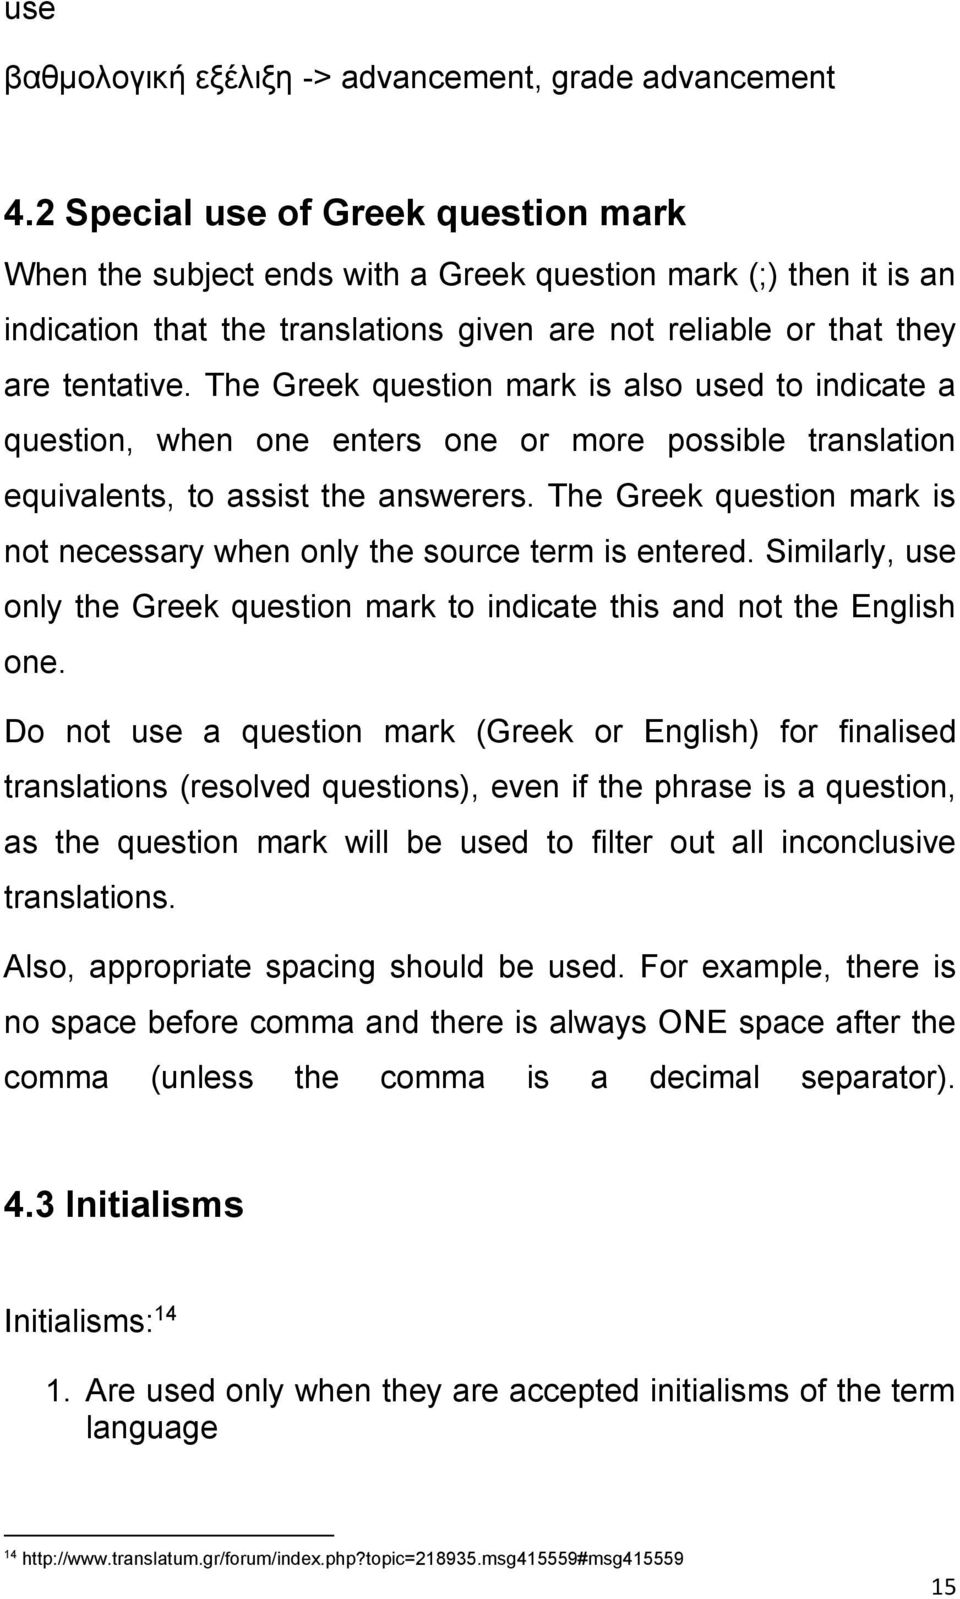 The Greek question mark is also used to indicate a question, when one enters one or more possible translation equivalents, to assist the answerers.